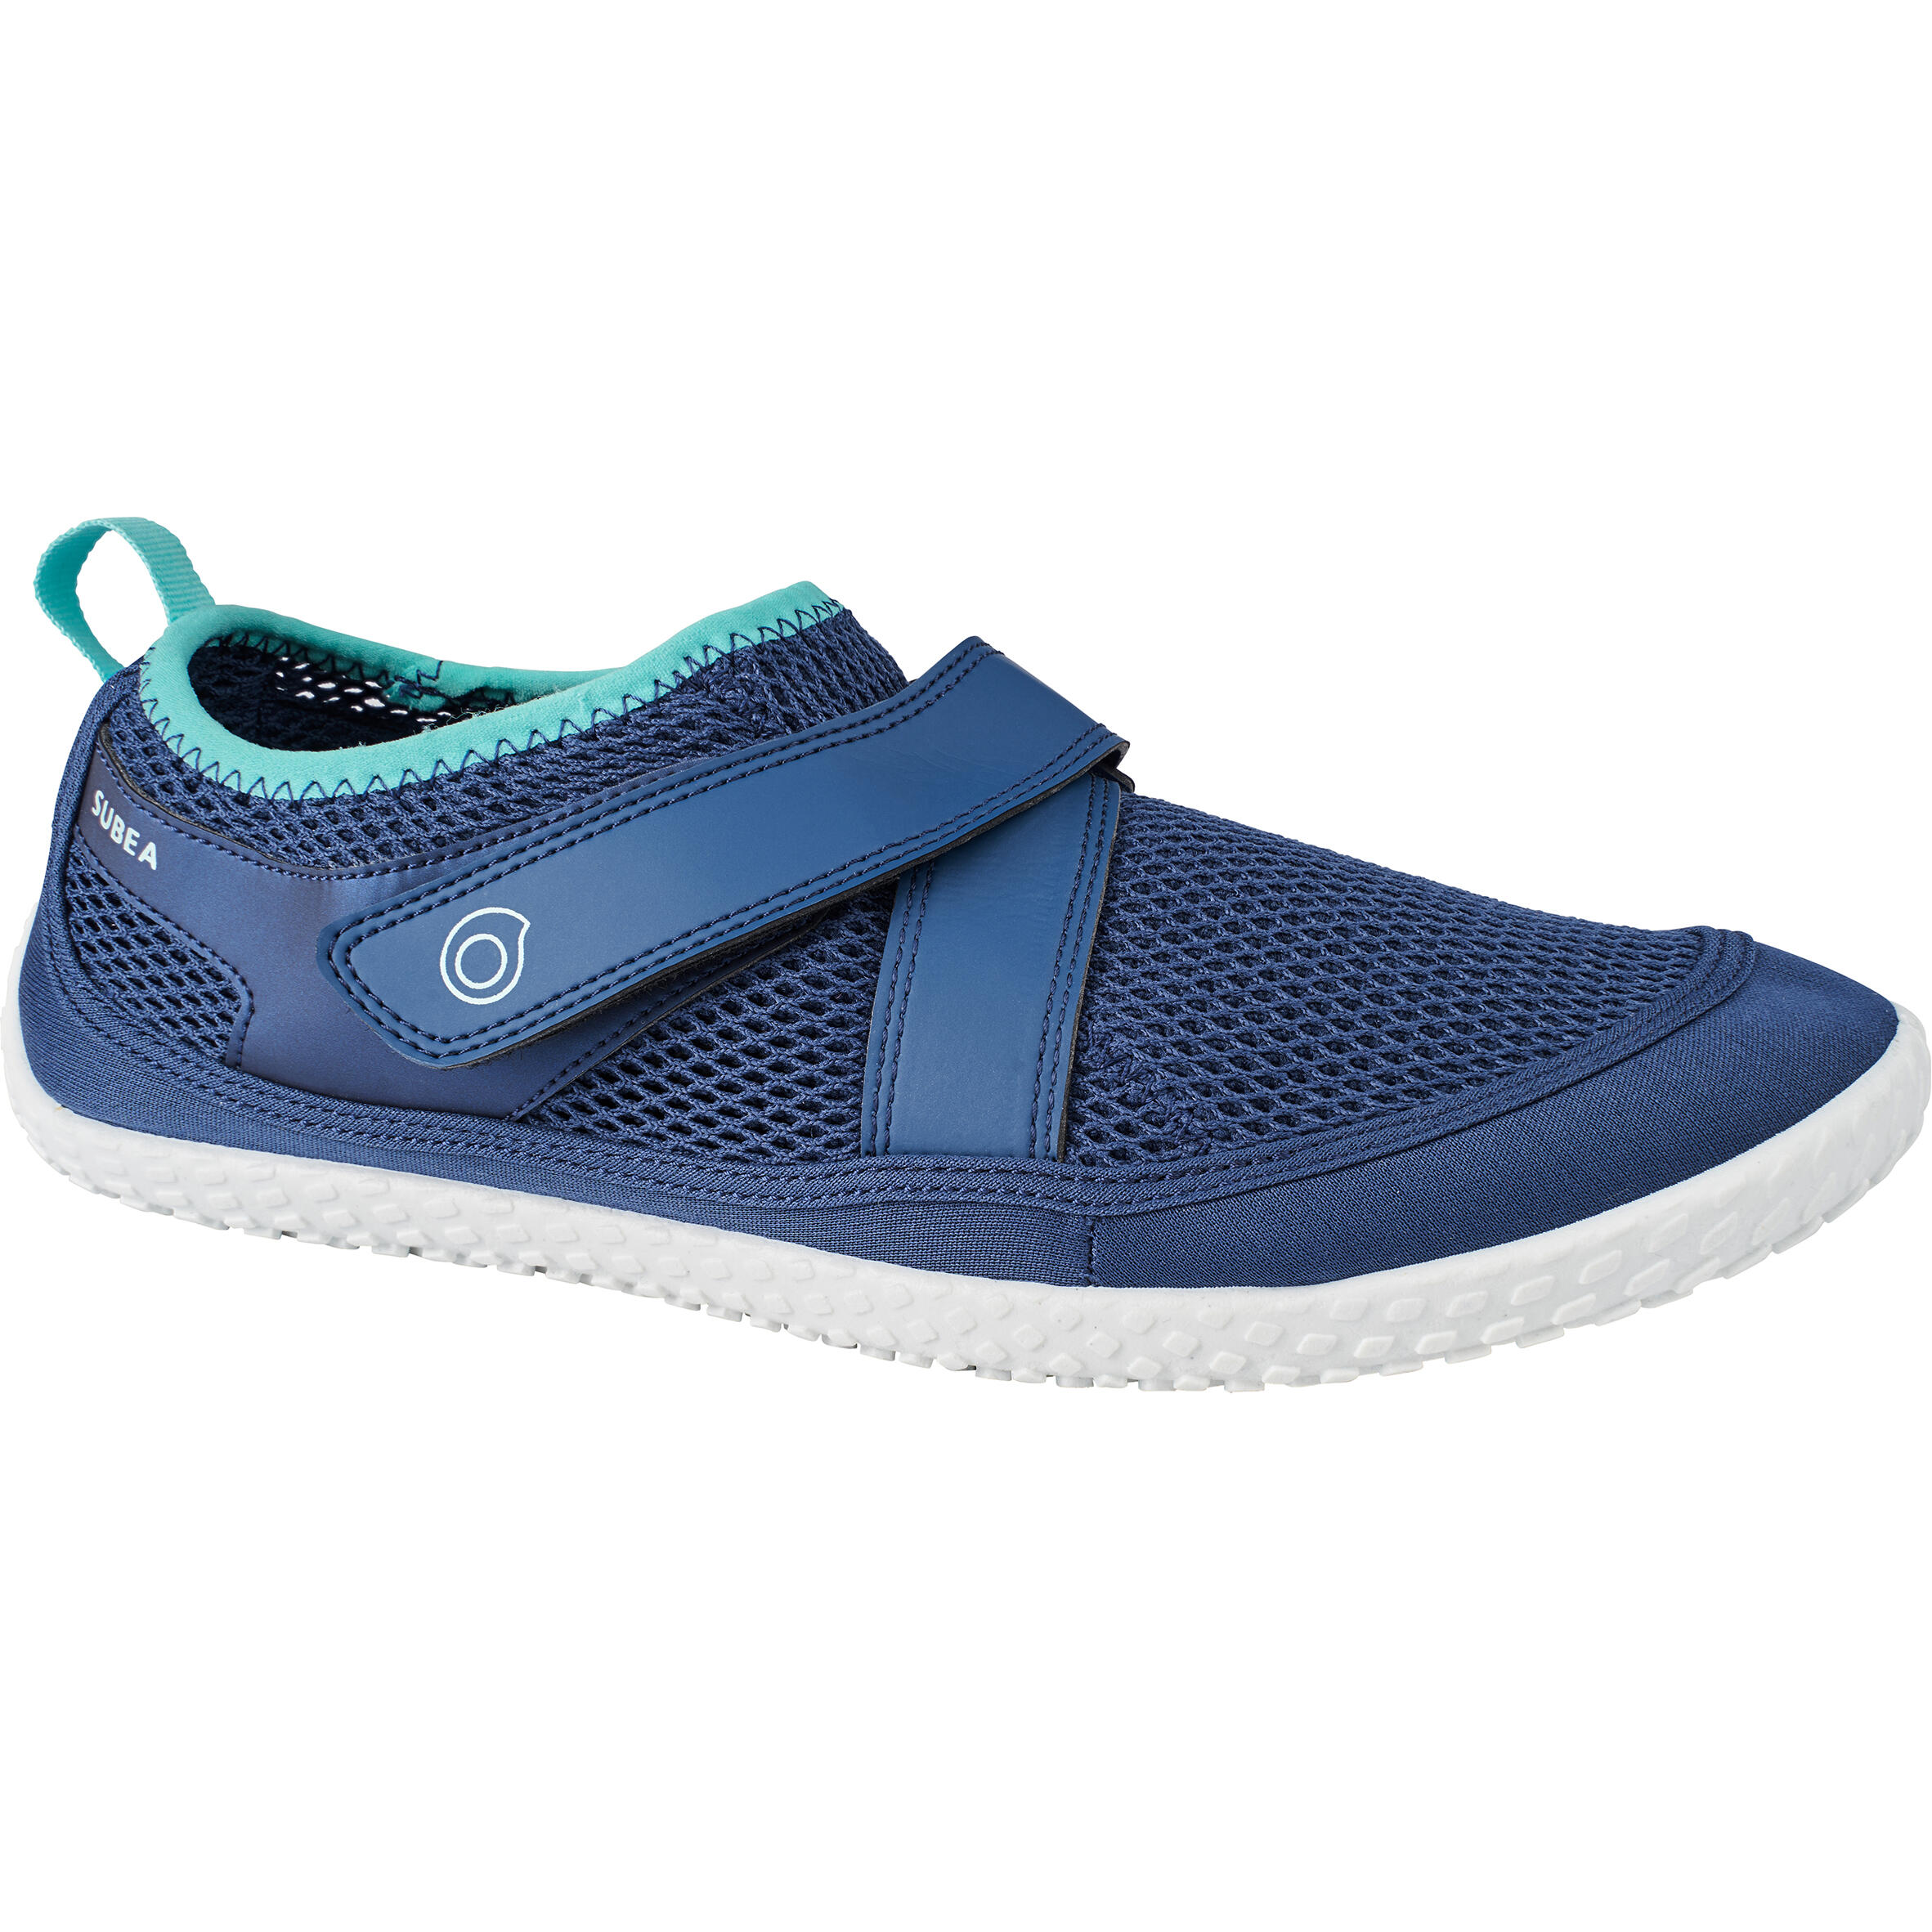 Caitin Boys Girls Water Shoes Quick Drying Aqua Beach Pool Swim Lightweight Athletic Sneakers for Little Big Kids 